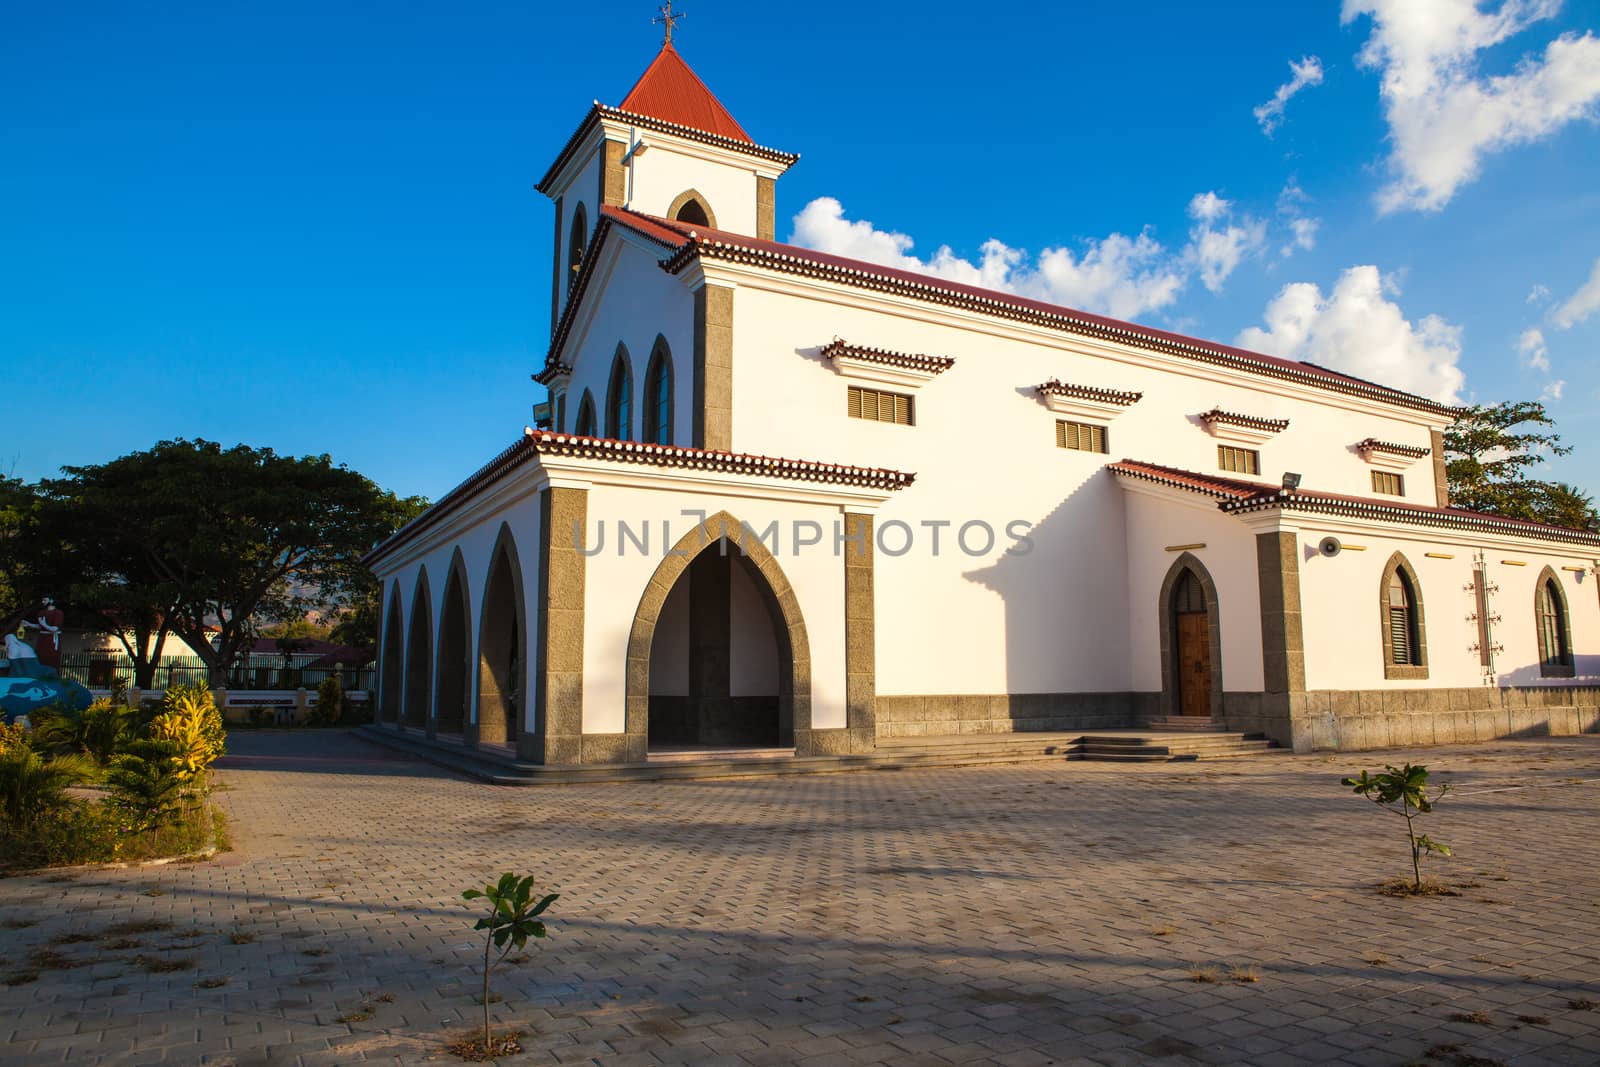 Dili, East Timor Jul 30 : The Church de São António de Motael is the oldest Roman Catholic church in East Timor. It was rebuilt in 1955 in the old Portuguese style.